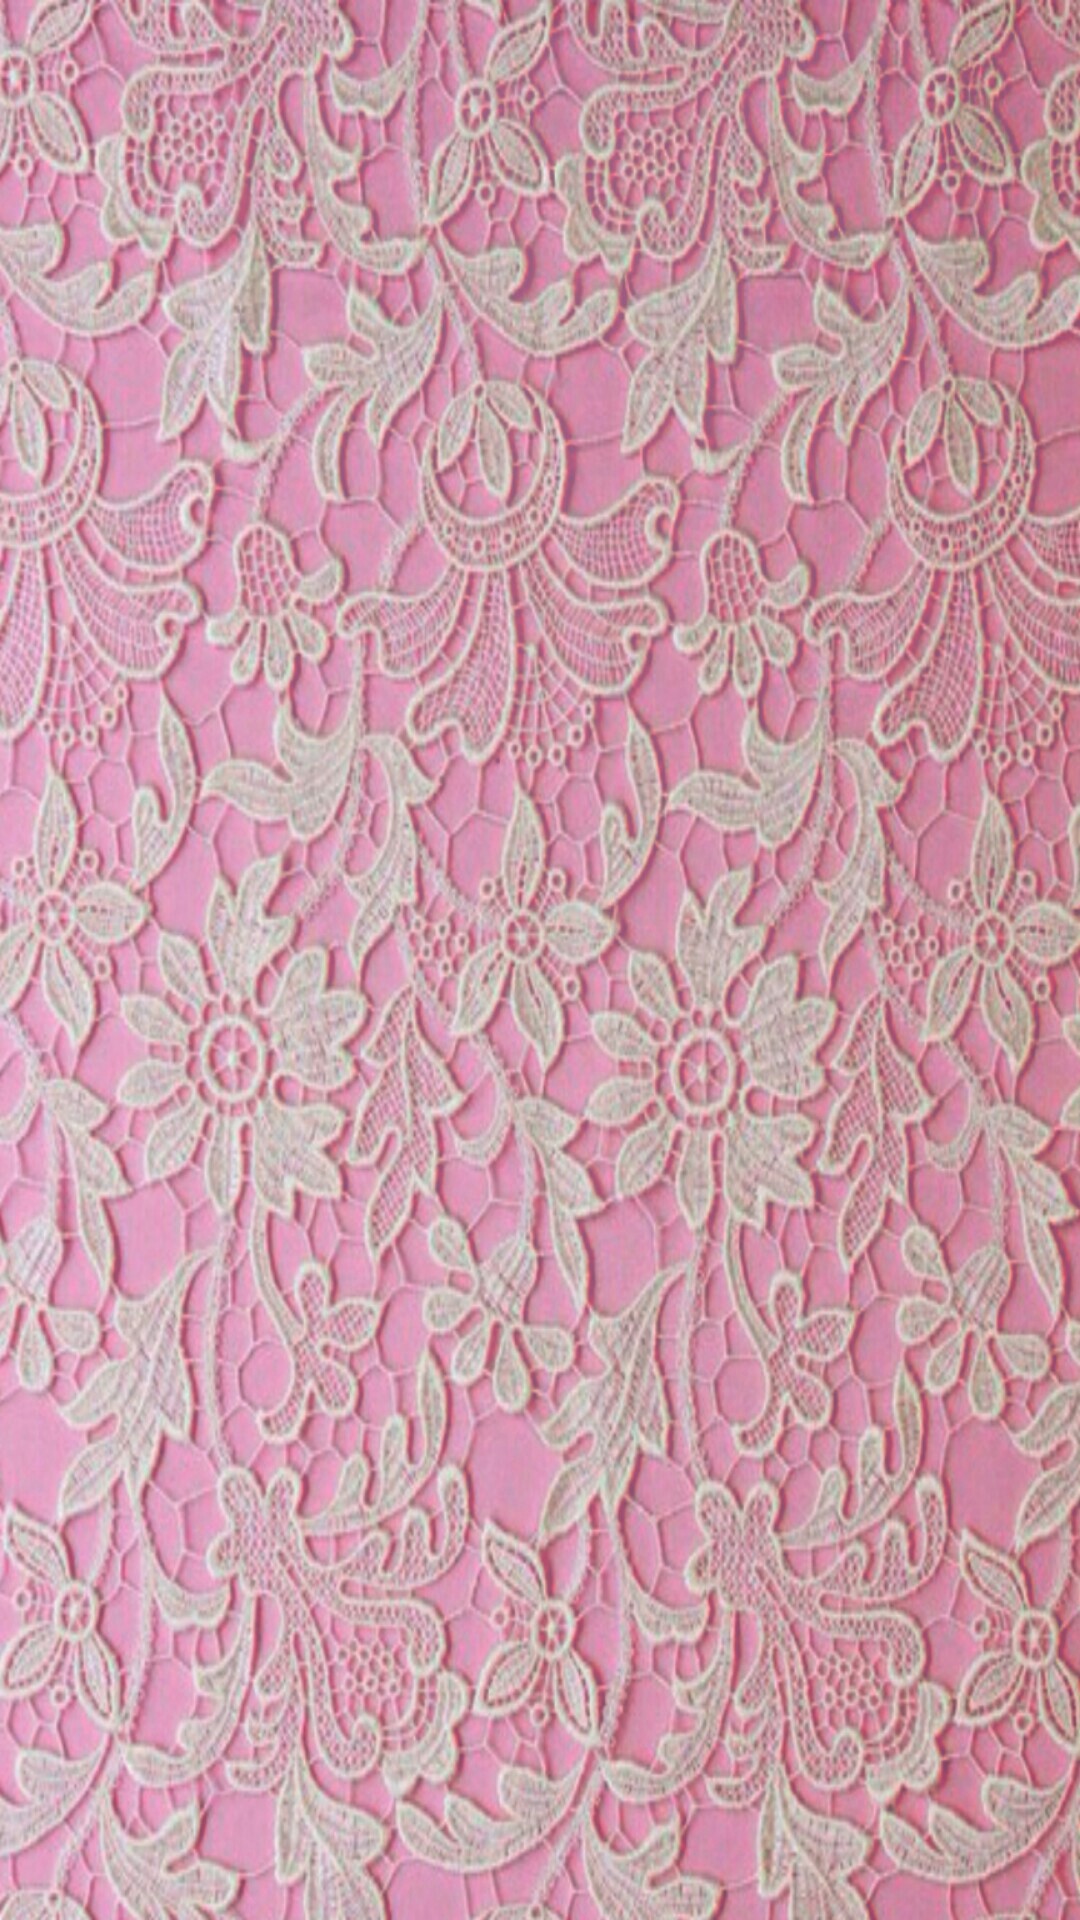 1080x1920 Explore Lace Wallpaper, Pink Lace, and more!